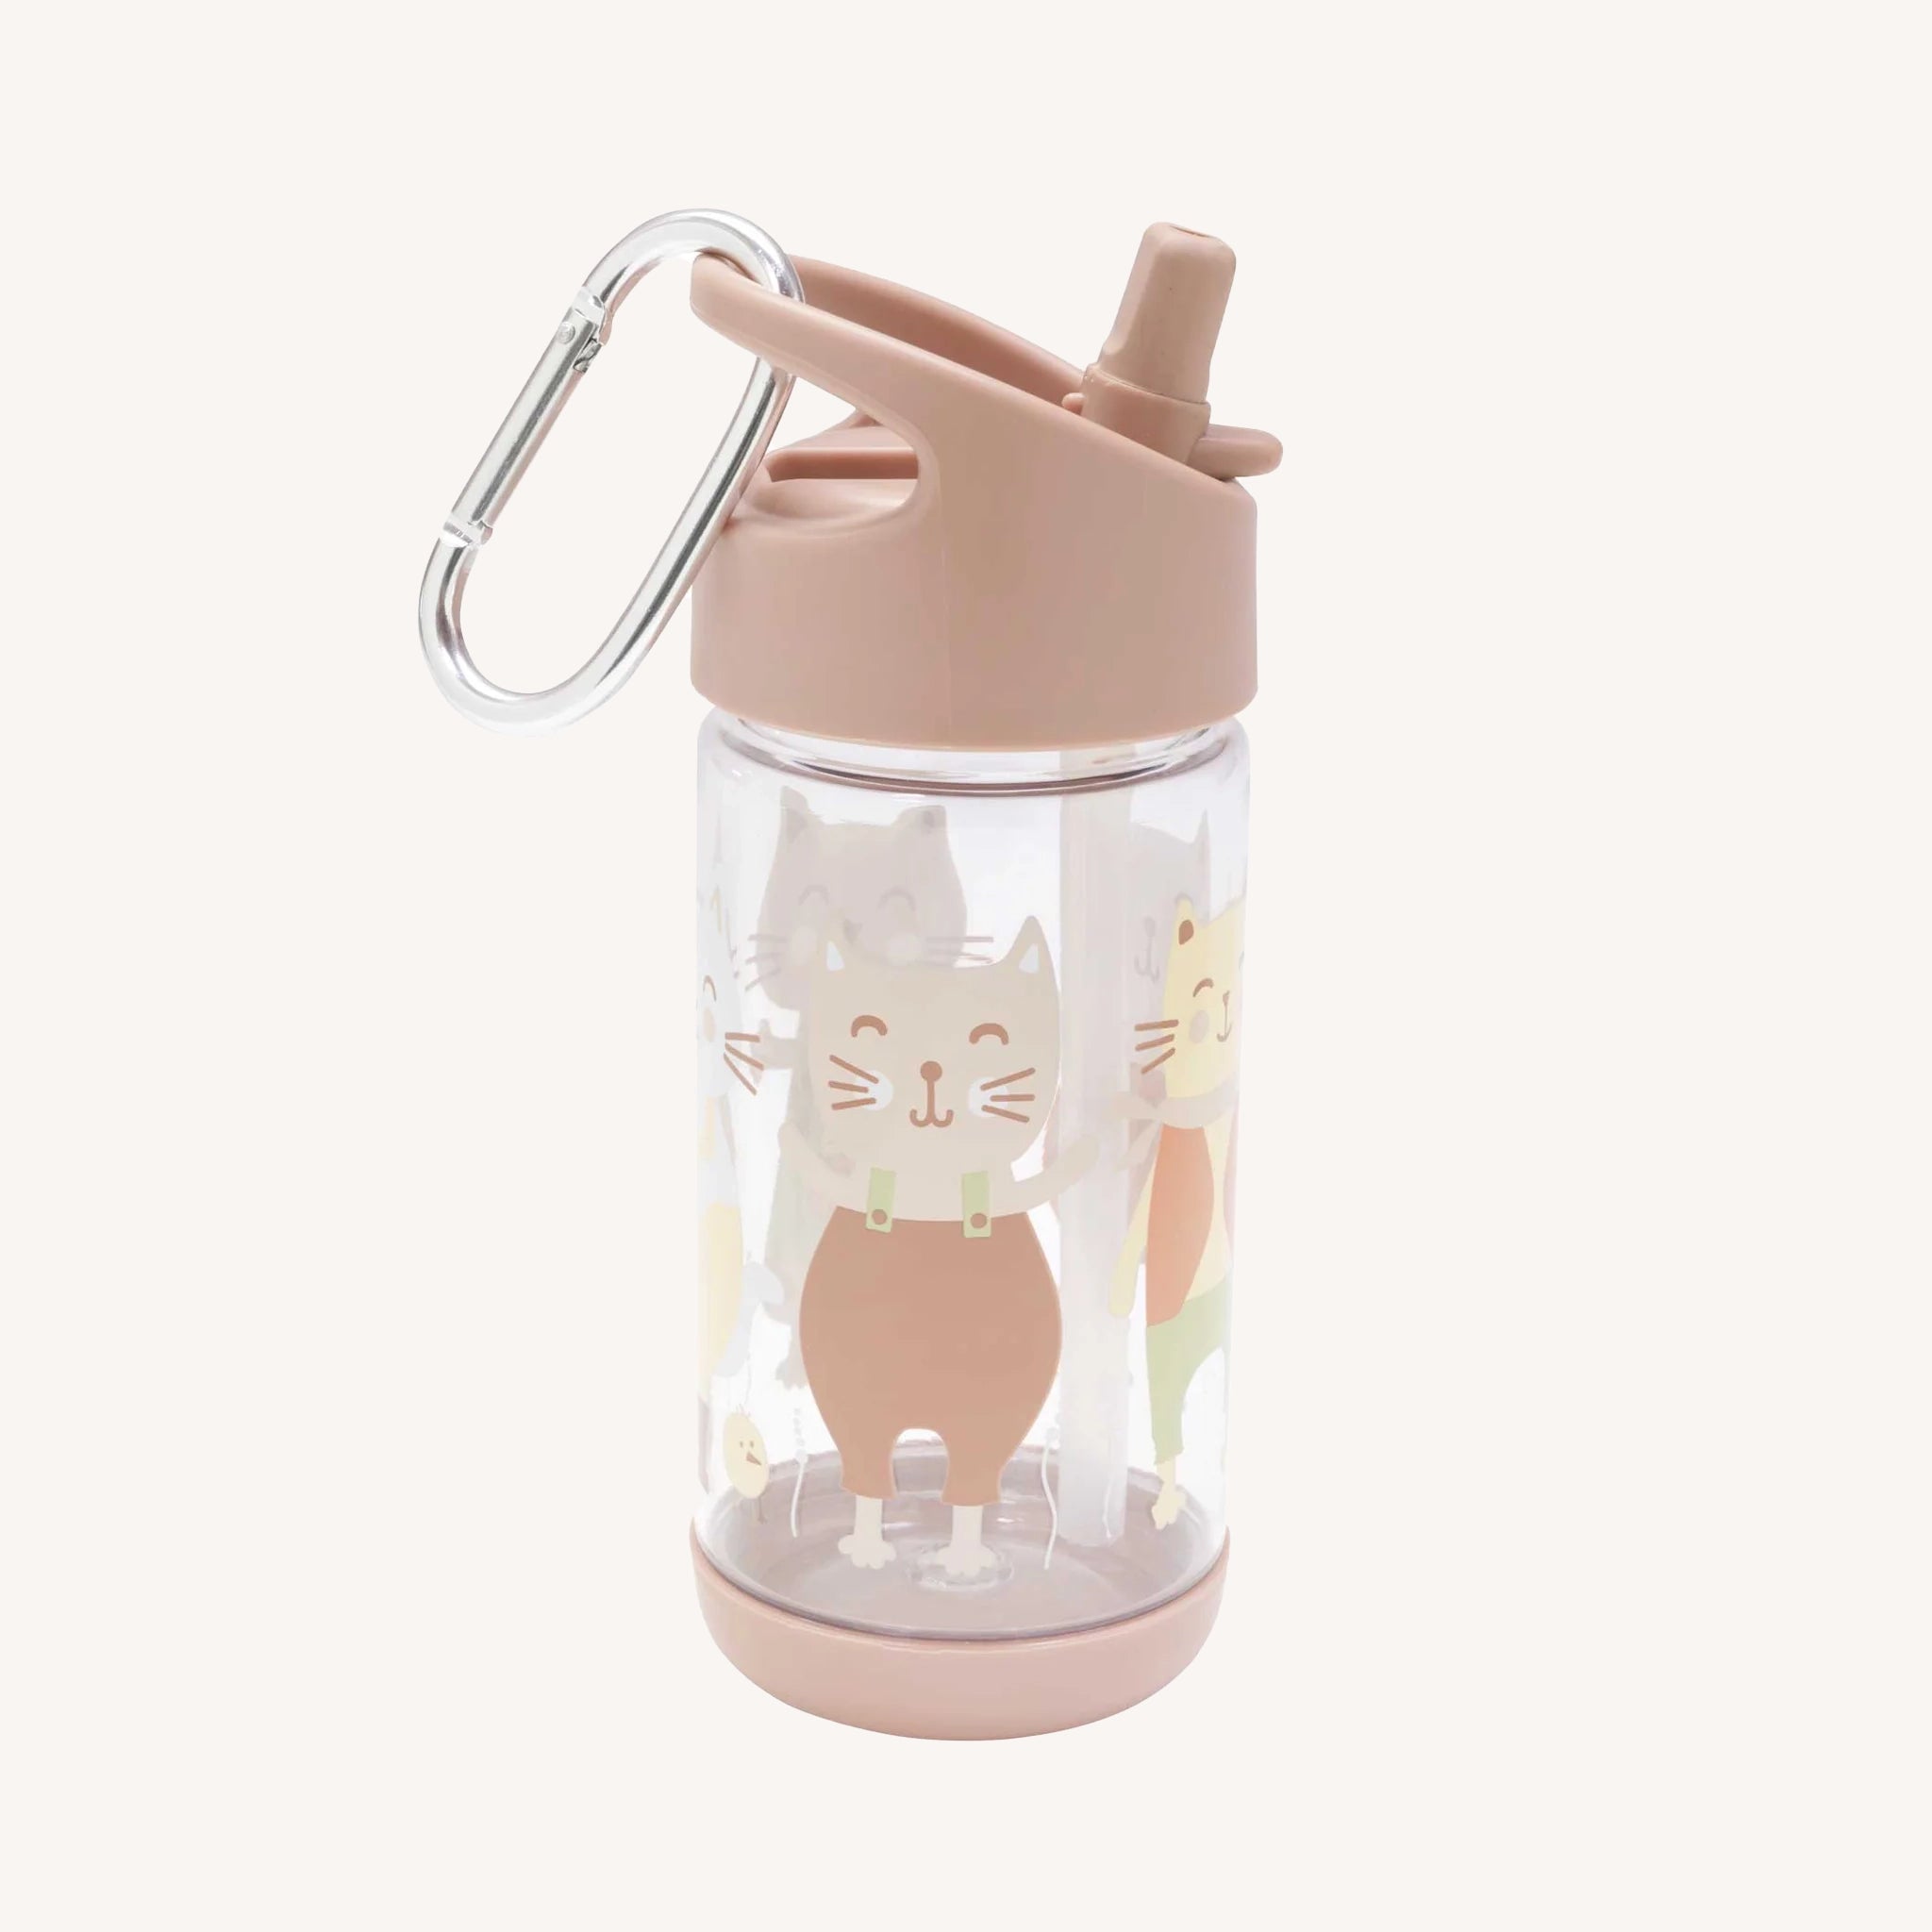 On a white background is a light pink and clear sippy cup with a metal ring loop and kitten designs all around the clear part of the sippy cup.